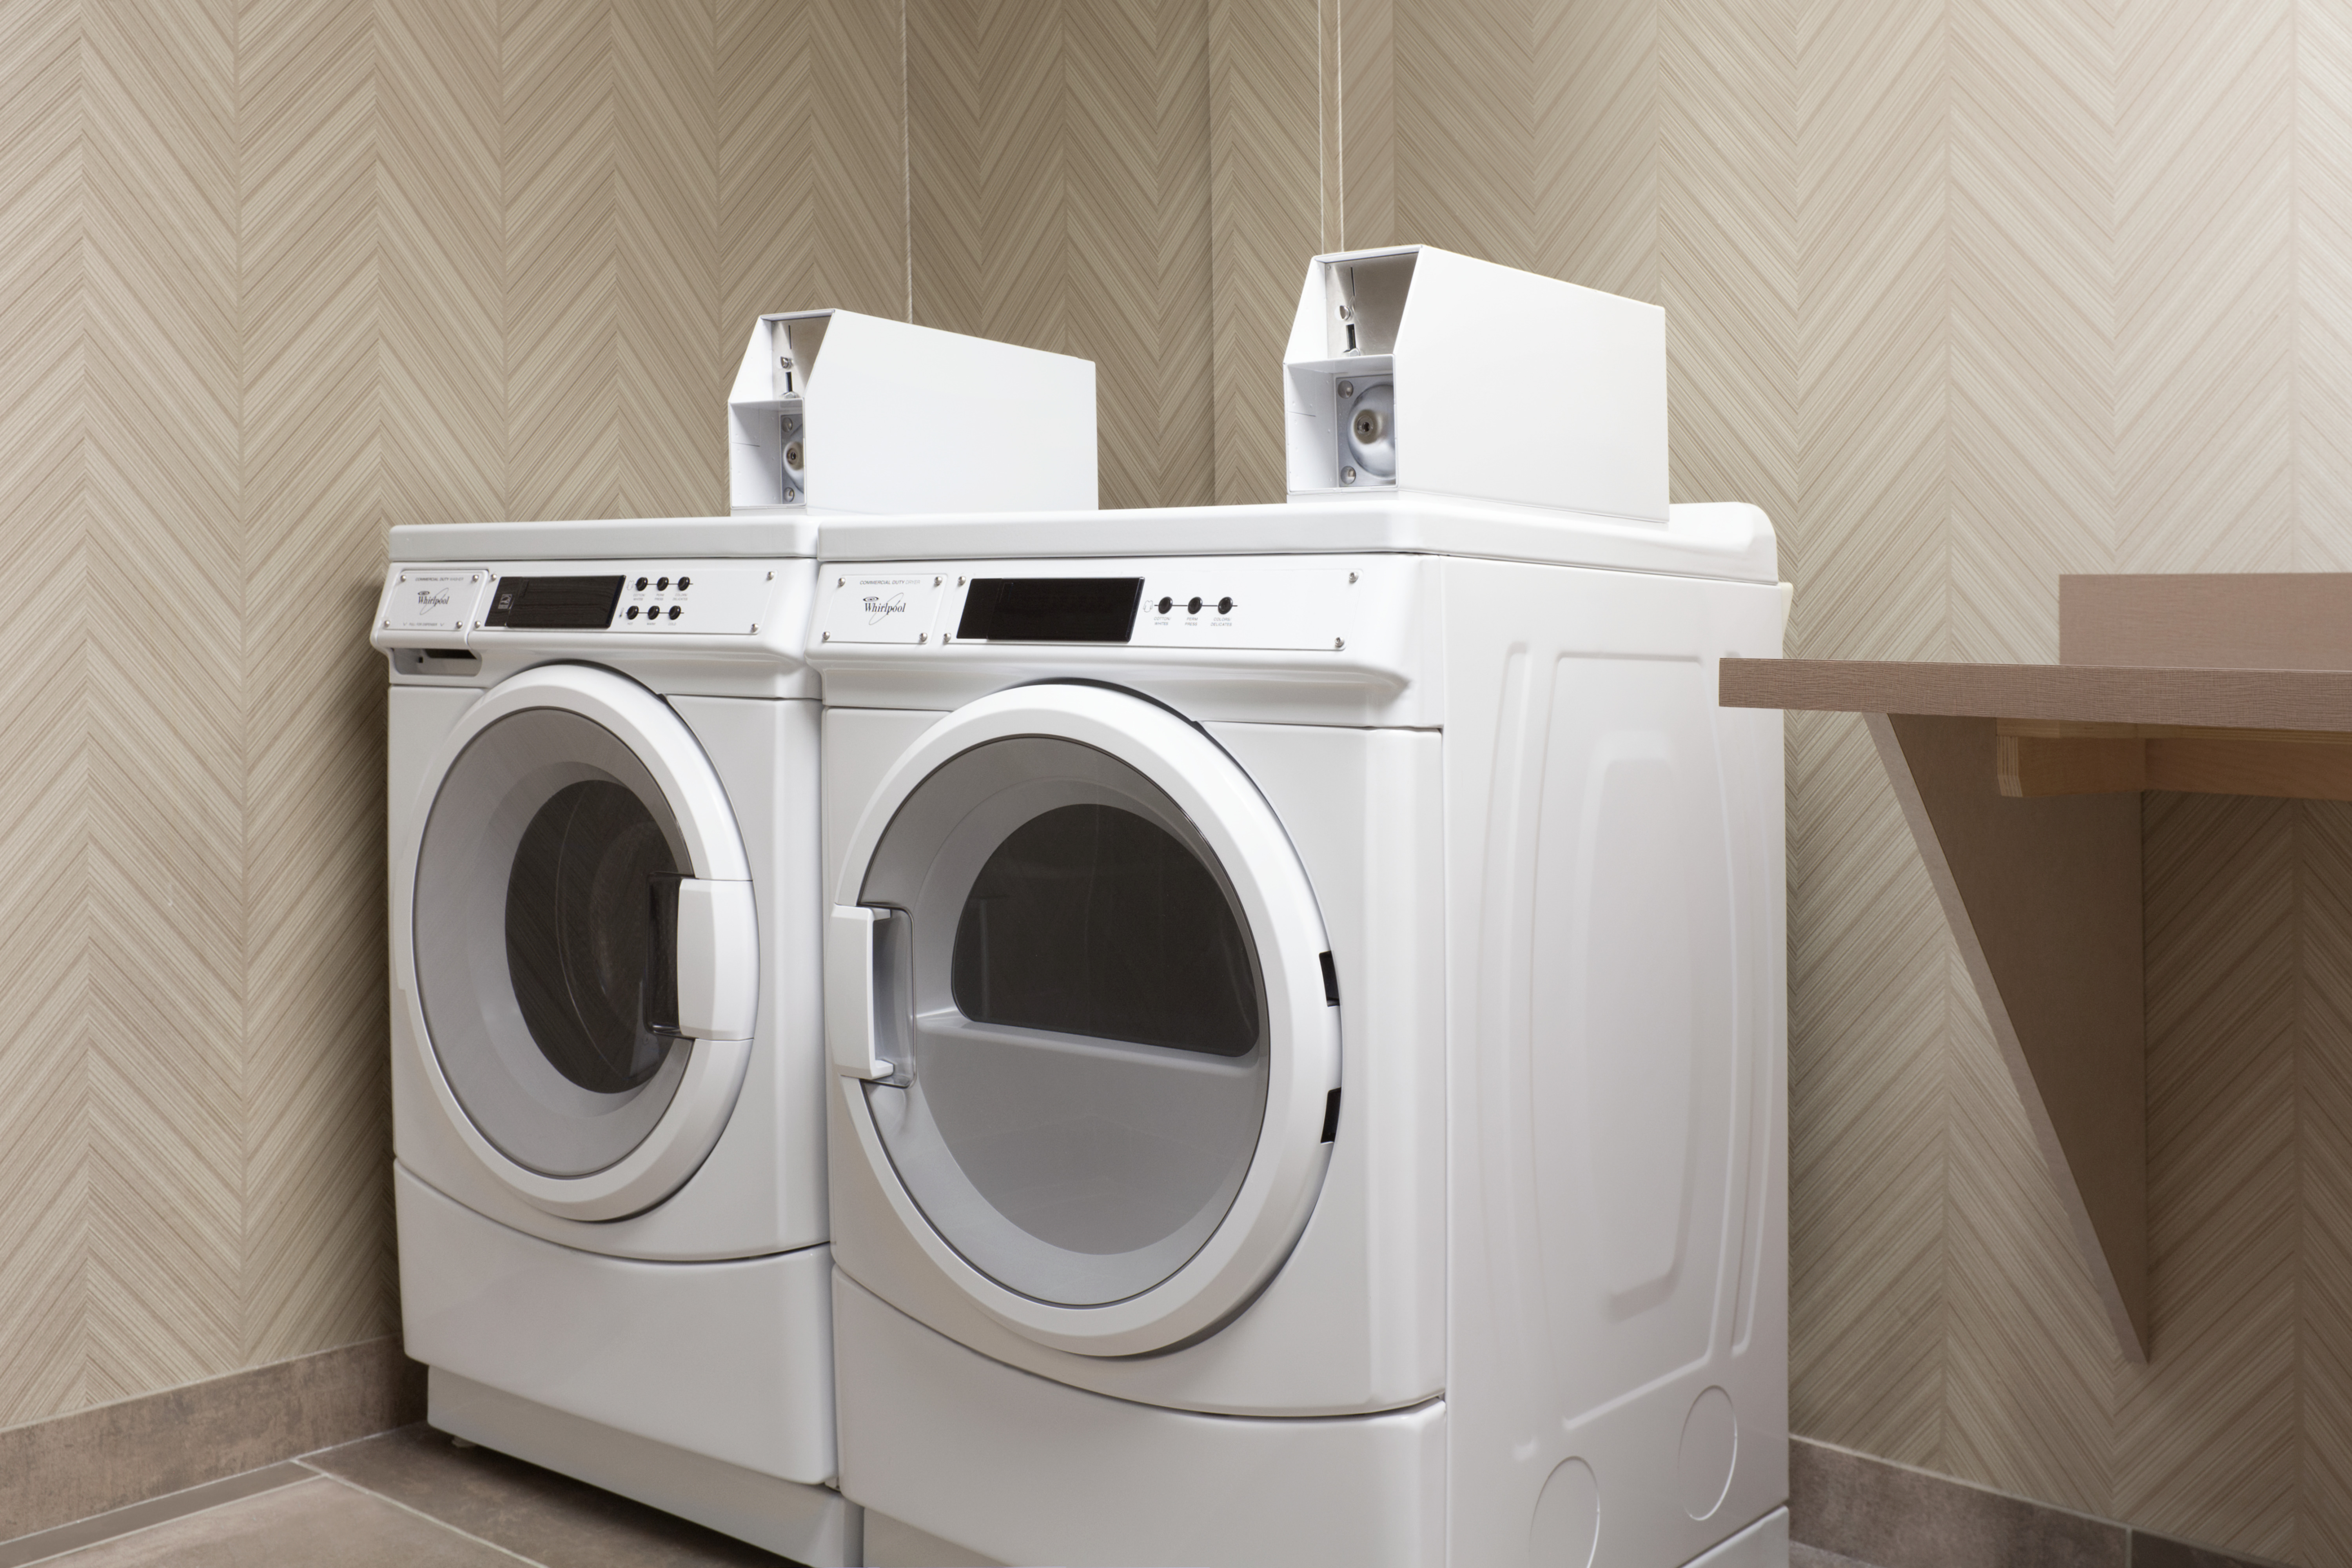 Guest Laundry Room with Coin Operated Washing Machines